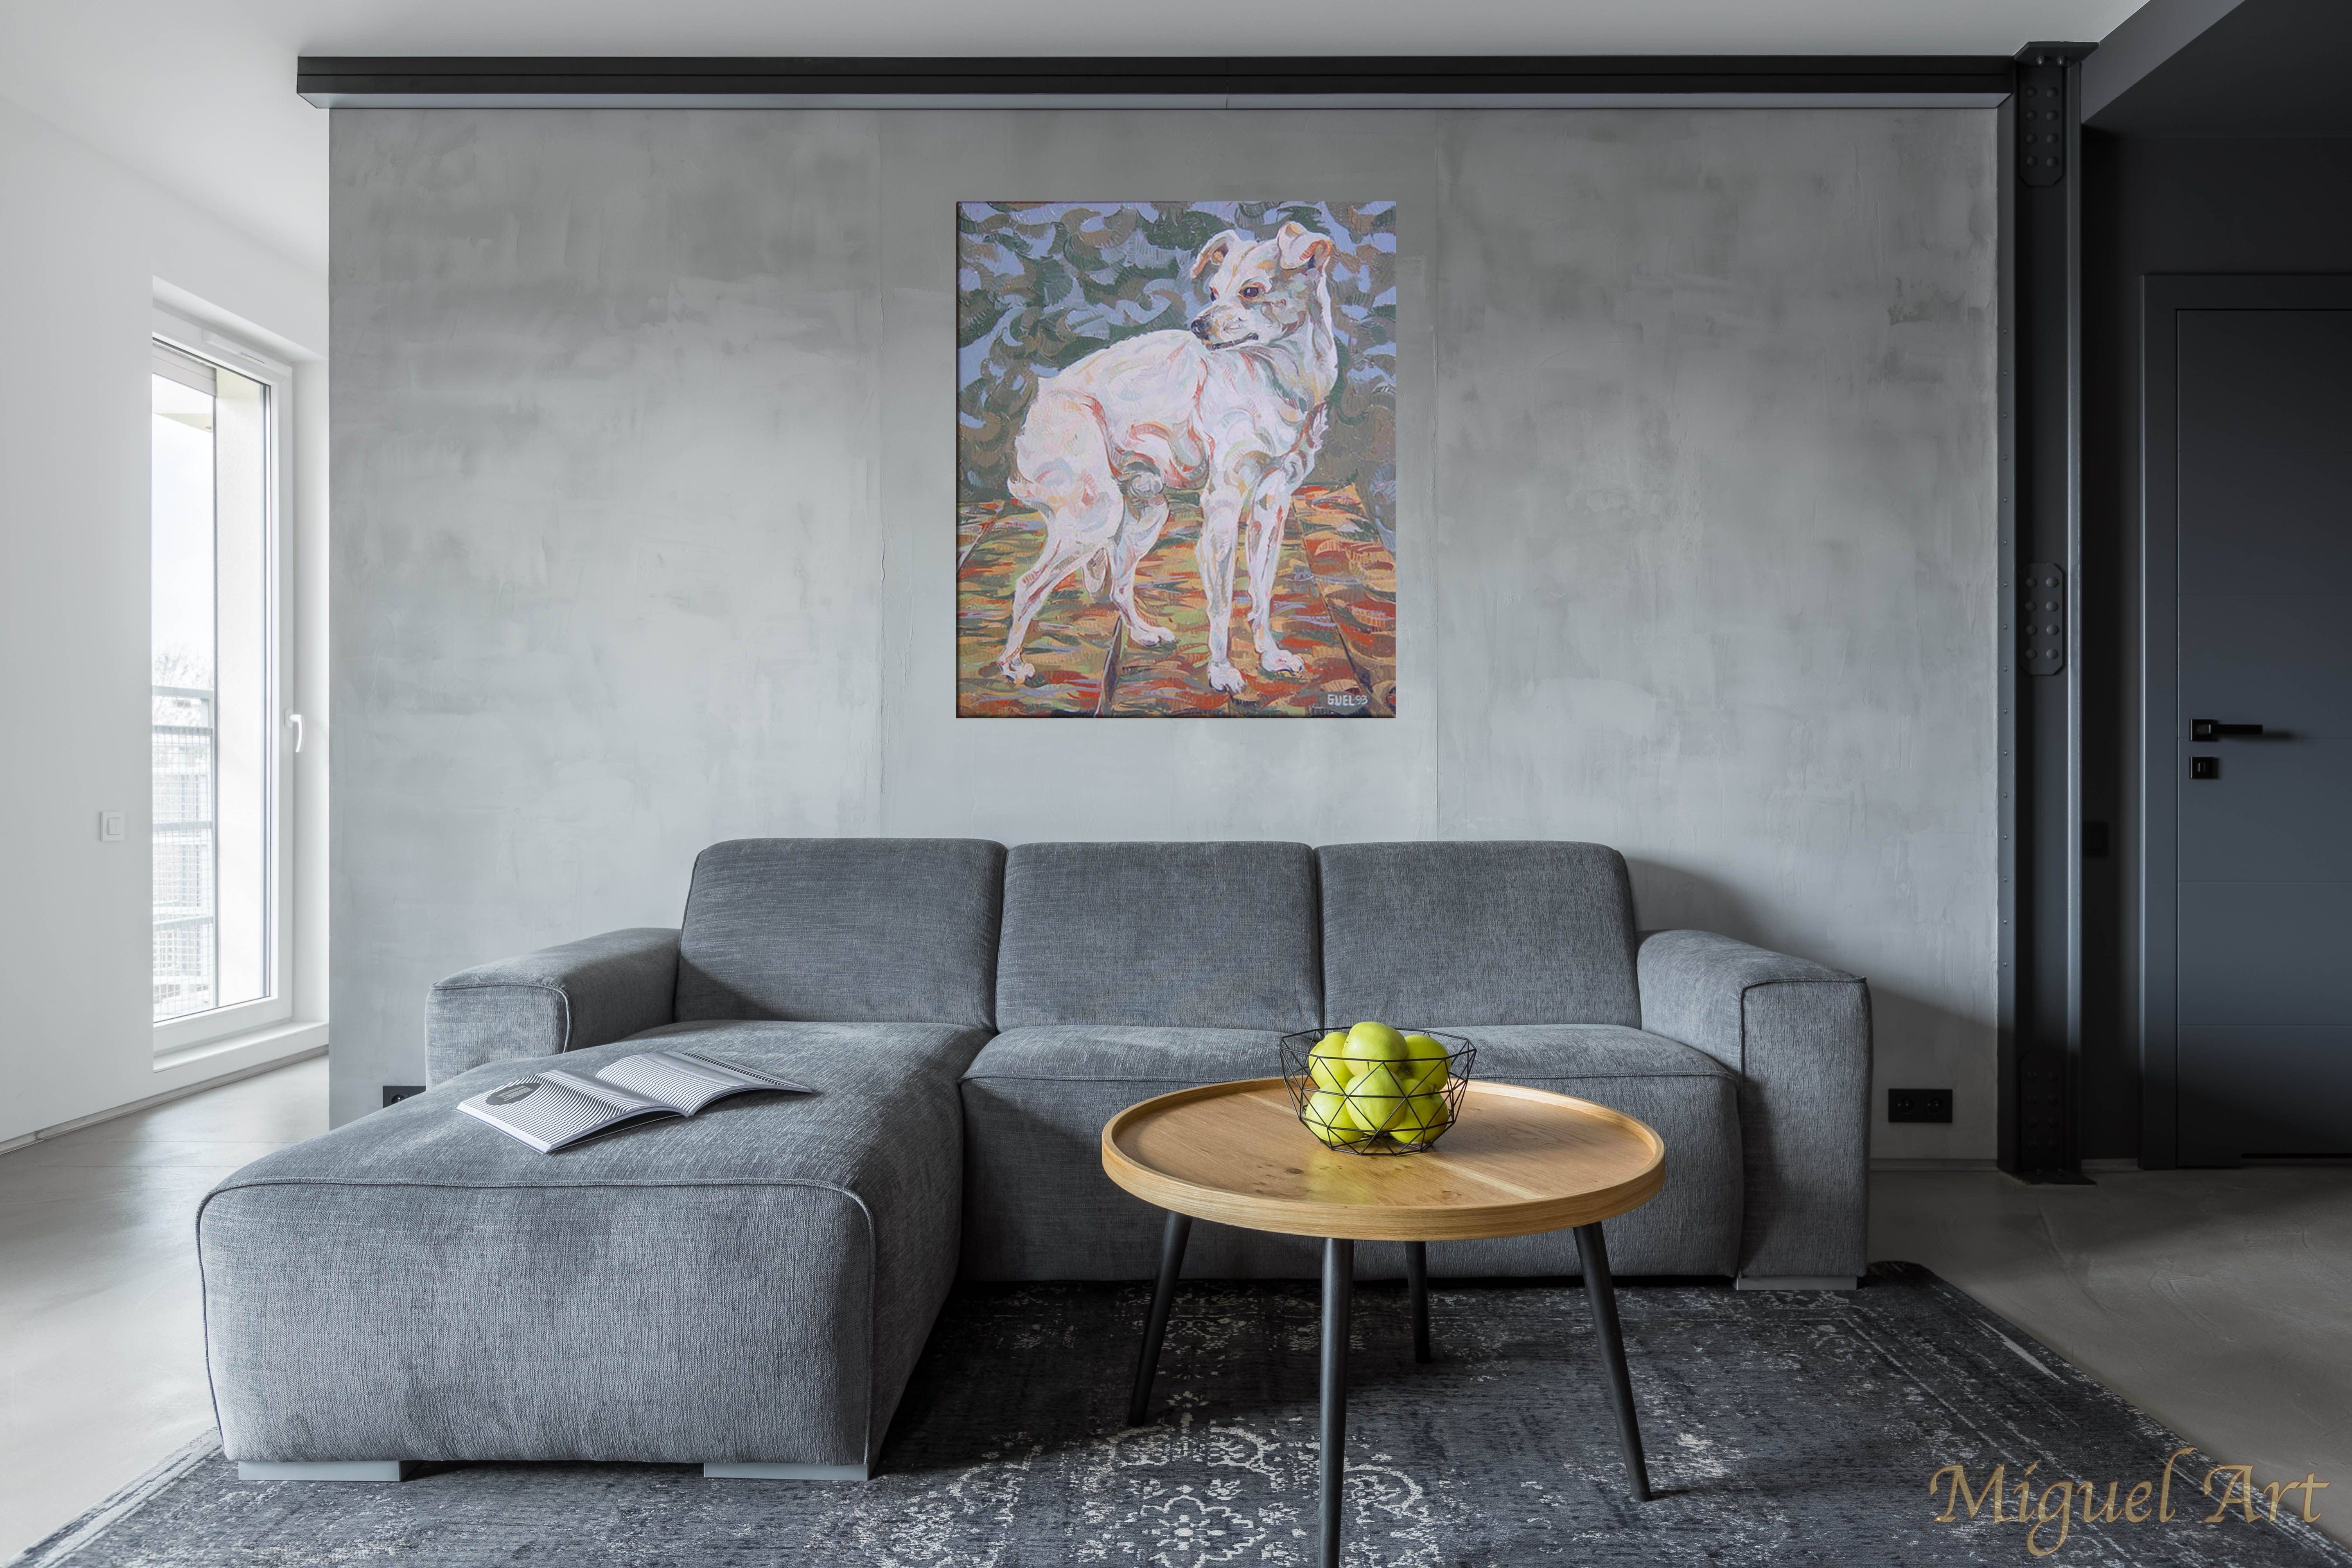 Painting of Toy displayed on the wall above a grey couch